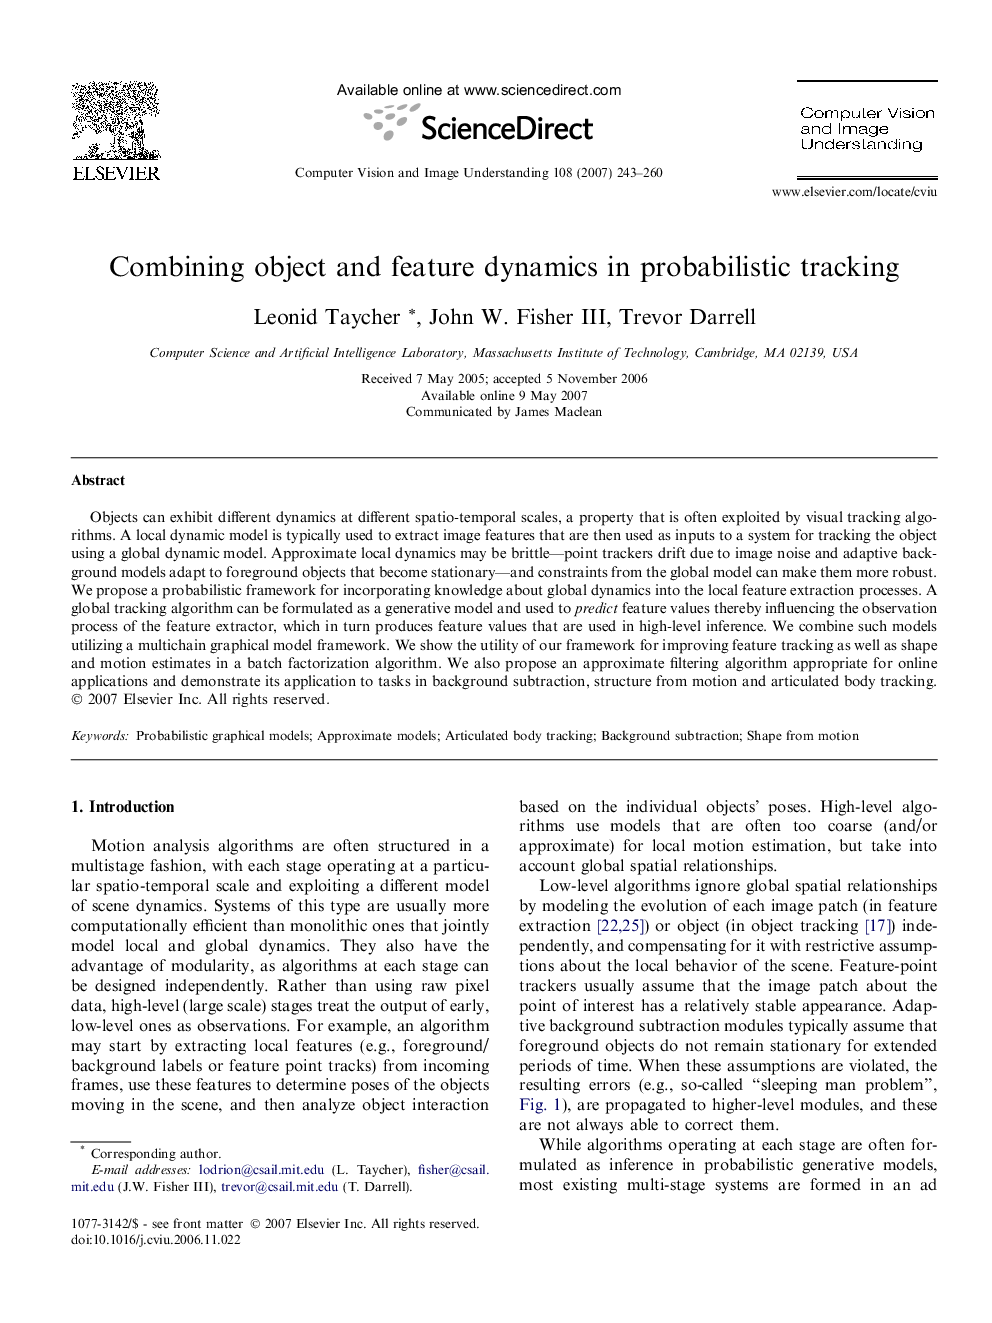 Combining object and feature dynamics in probabilistic tracking